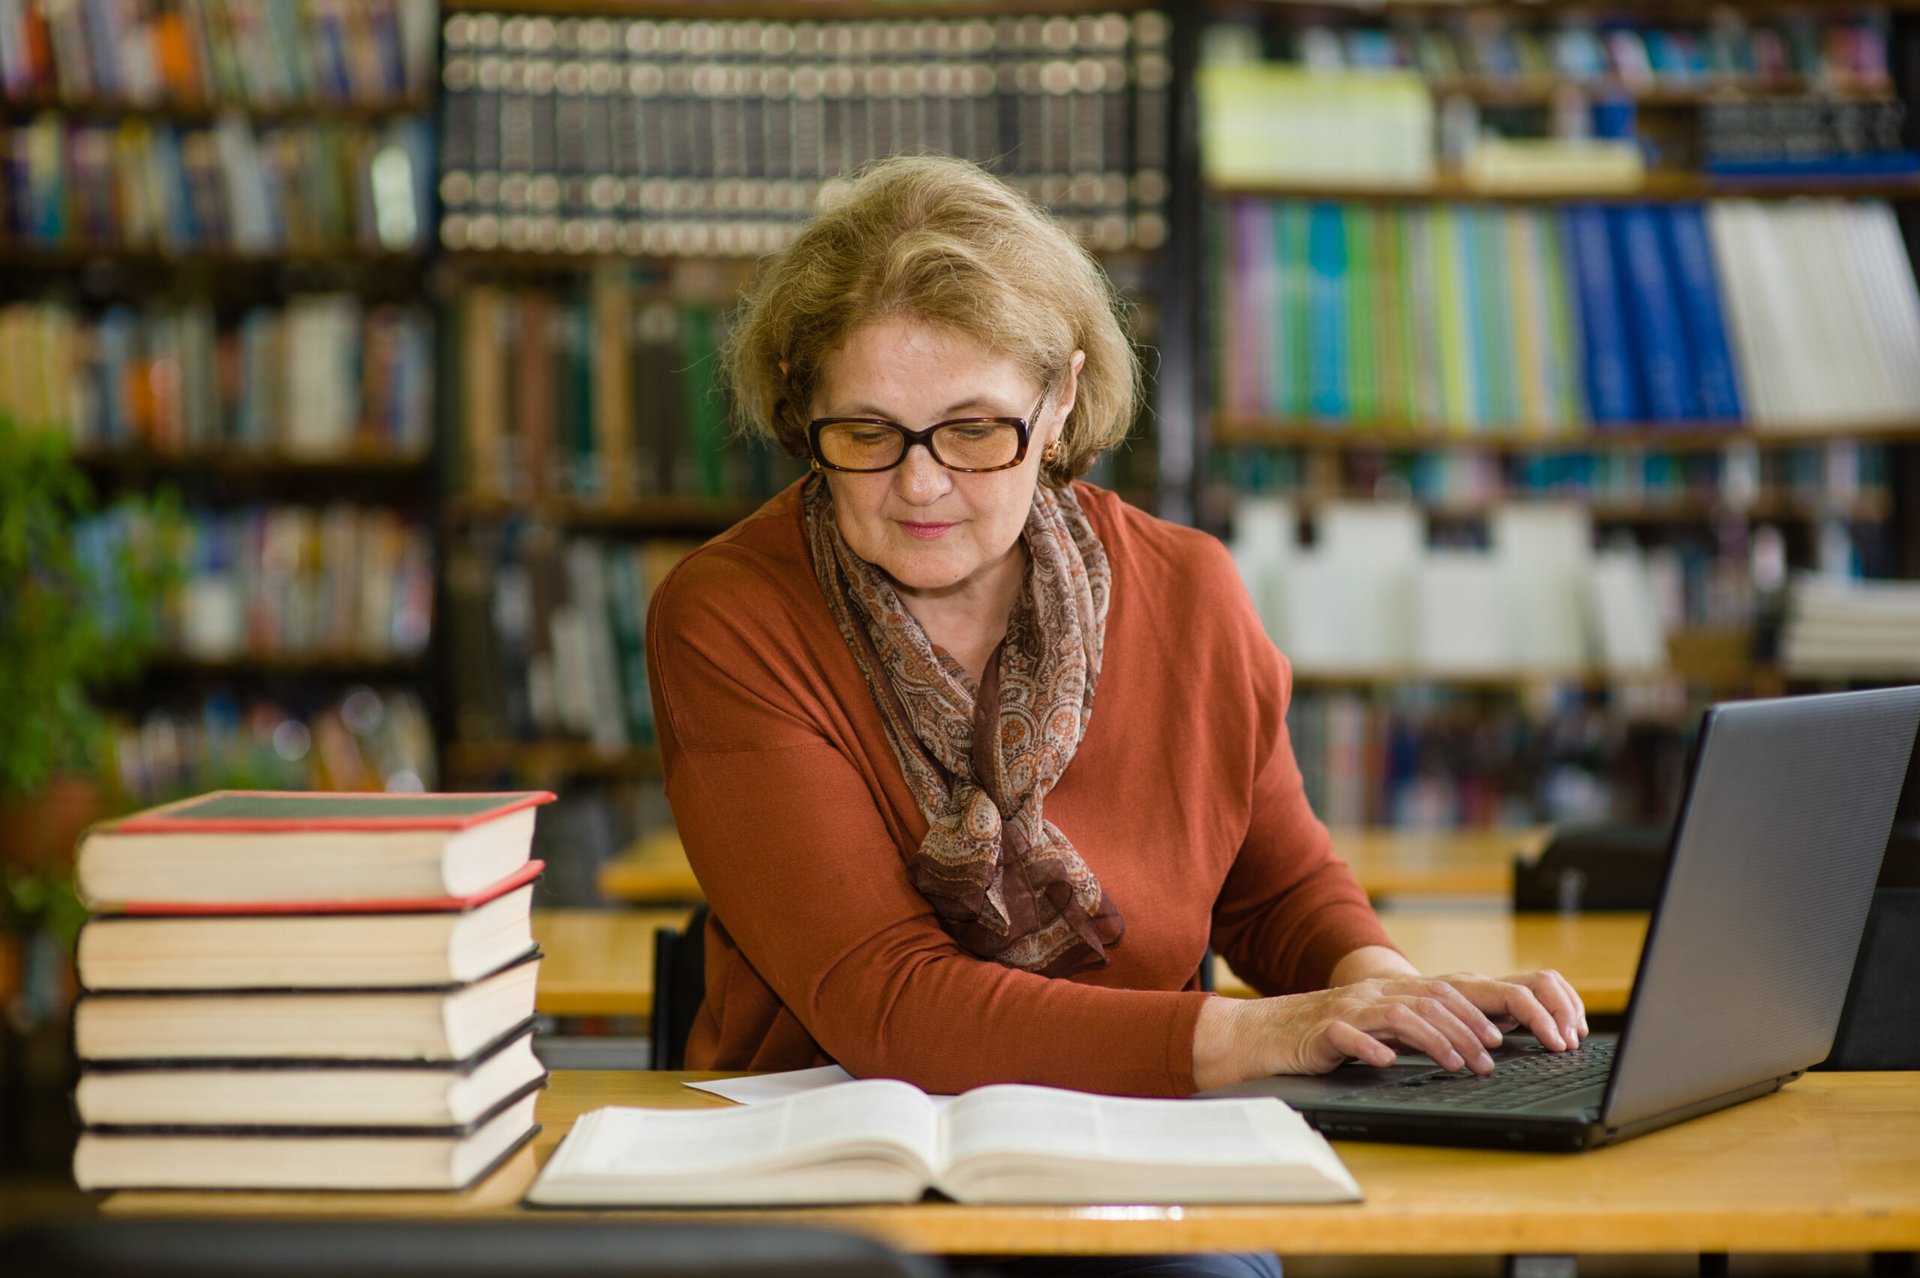 Older woman student using laptop in library studying